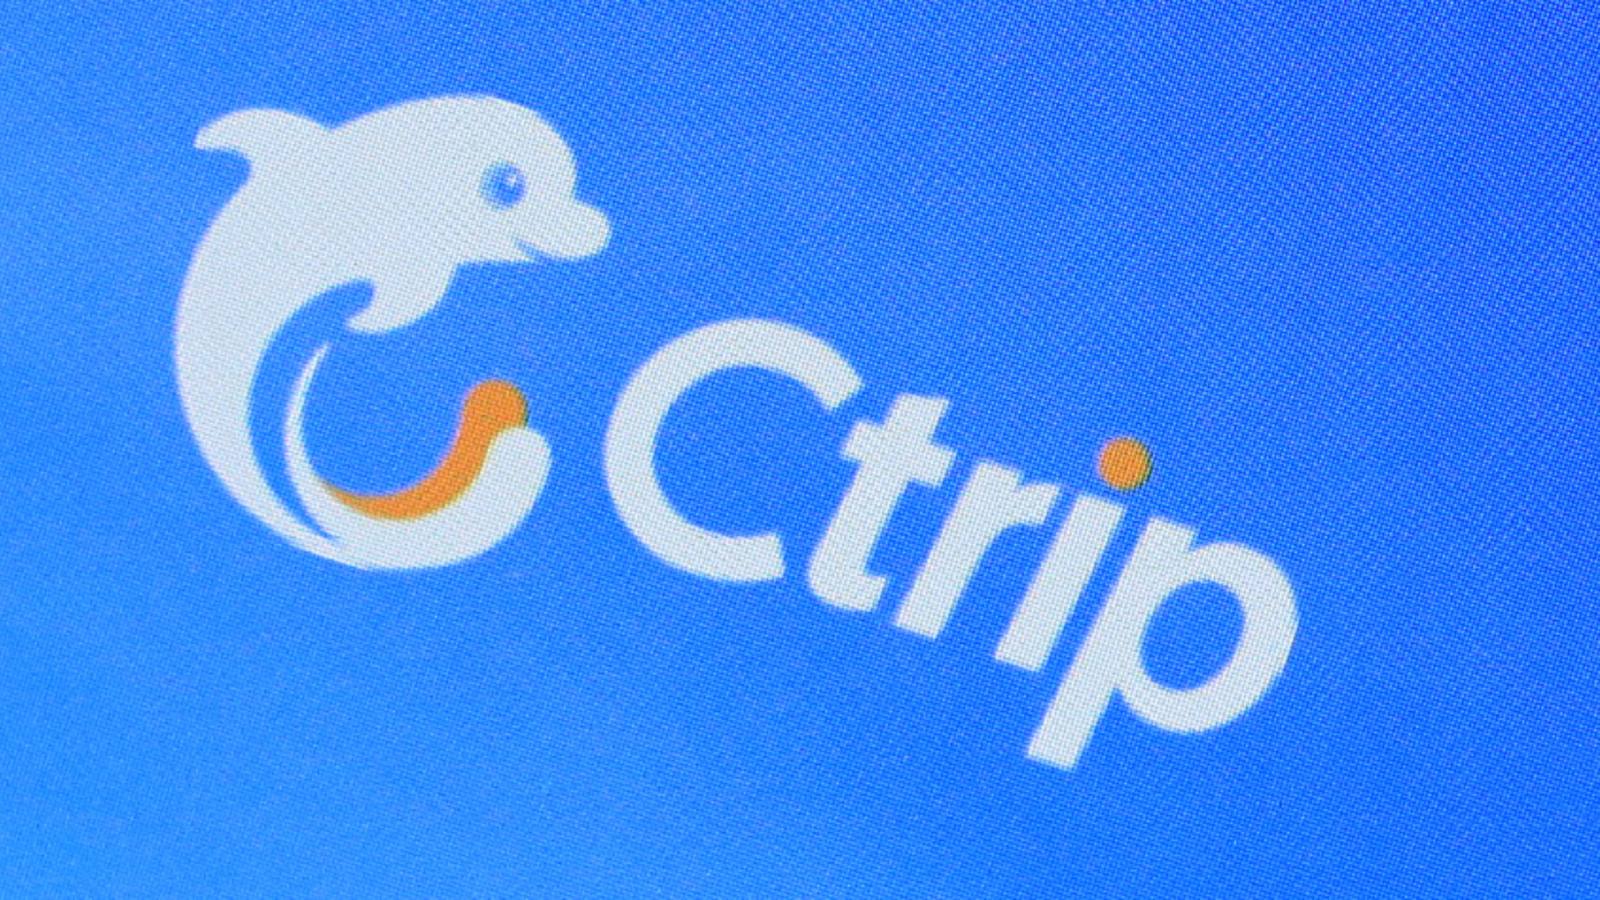 Ctrip Logo - Ctrip's profit dragged down by regulations and rising competition